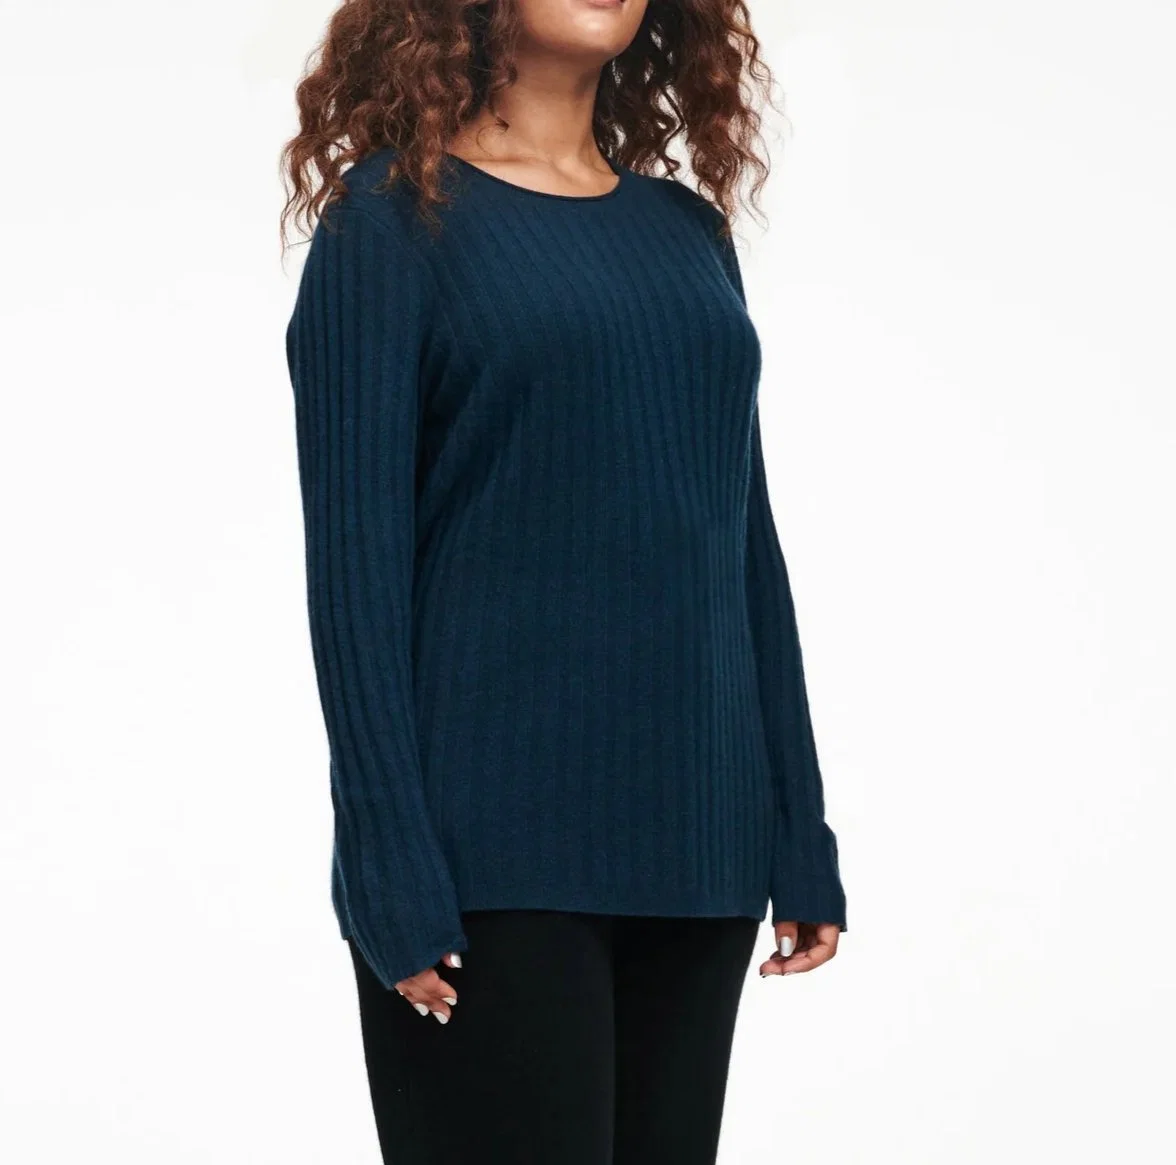 Organic Cashmere Knitted Ladies Fashion Pullover Sweater Apparel